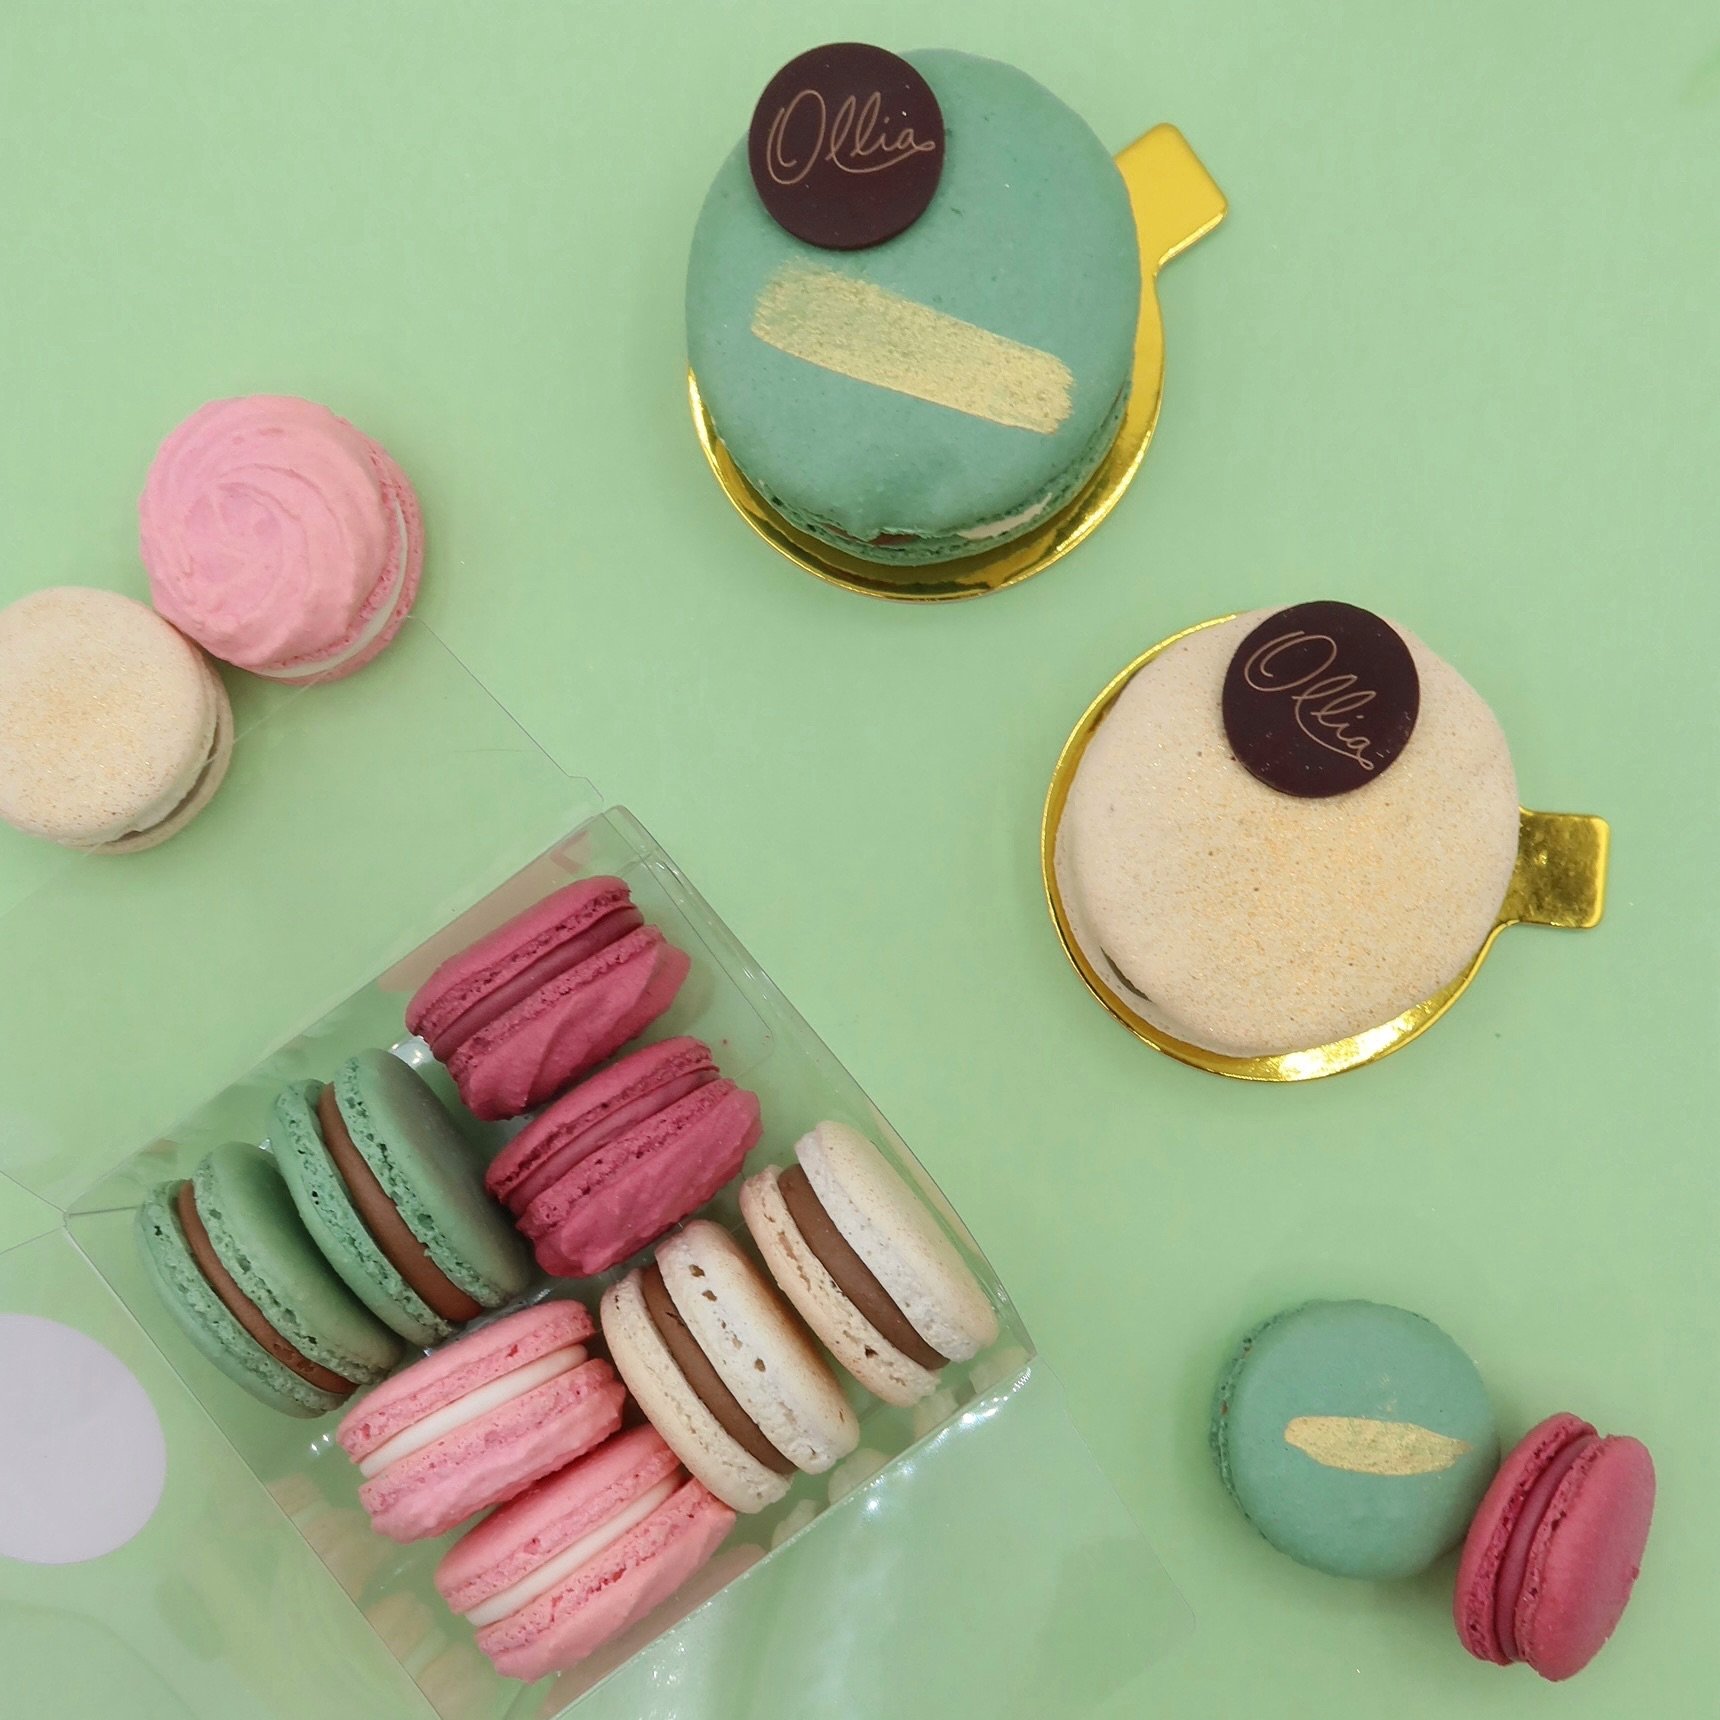 Introducing The Mother&rsquo;s Day Collection of macarons now in bloom at Ollia!

🌺 Berry Hibiscus
☕️ Caramel Latte
🍫 Chocolate Almond Mousse
🍋 Lavender Lemon Madeleine

Find these limited edition flavours in-store and online (link in bio!). Choos